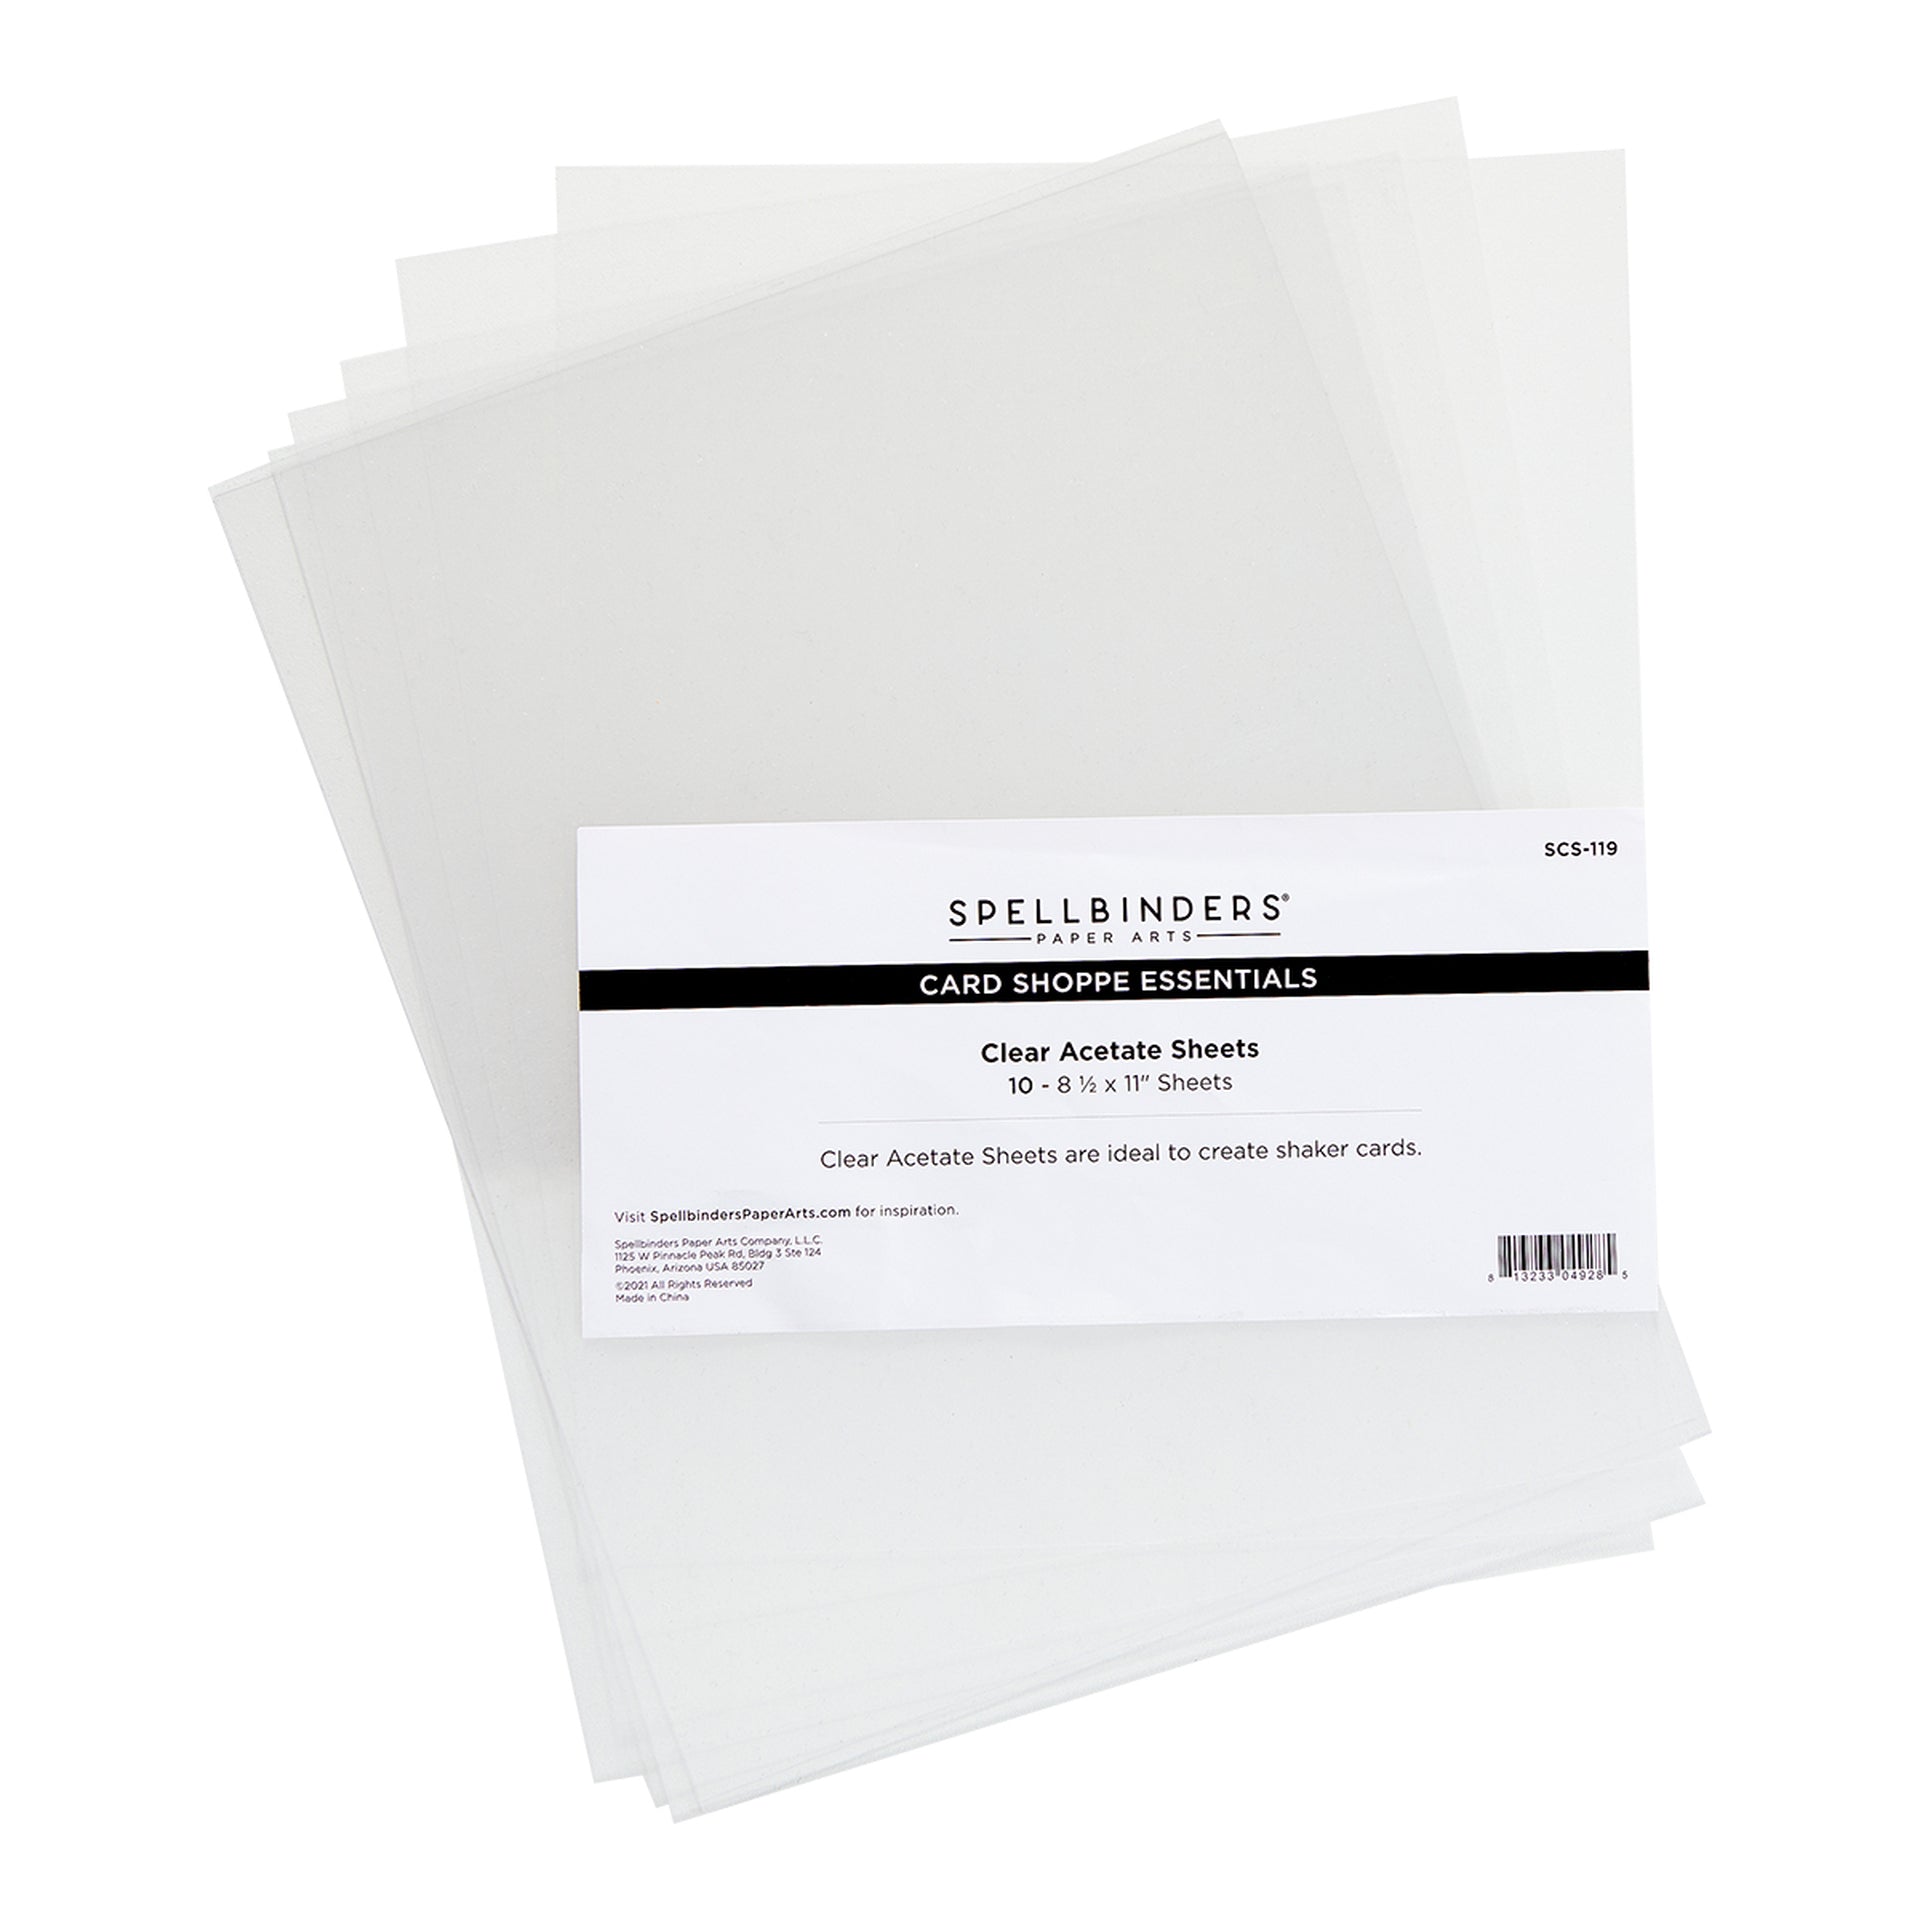 Clear Acetate Sheets 8 1/2"x11", 10 Pack